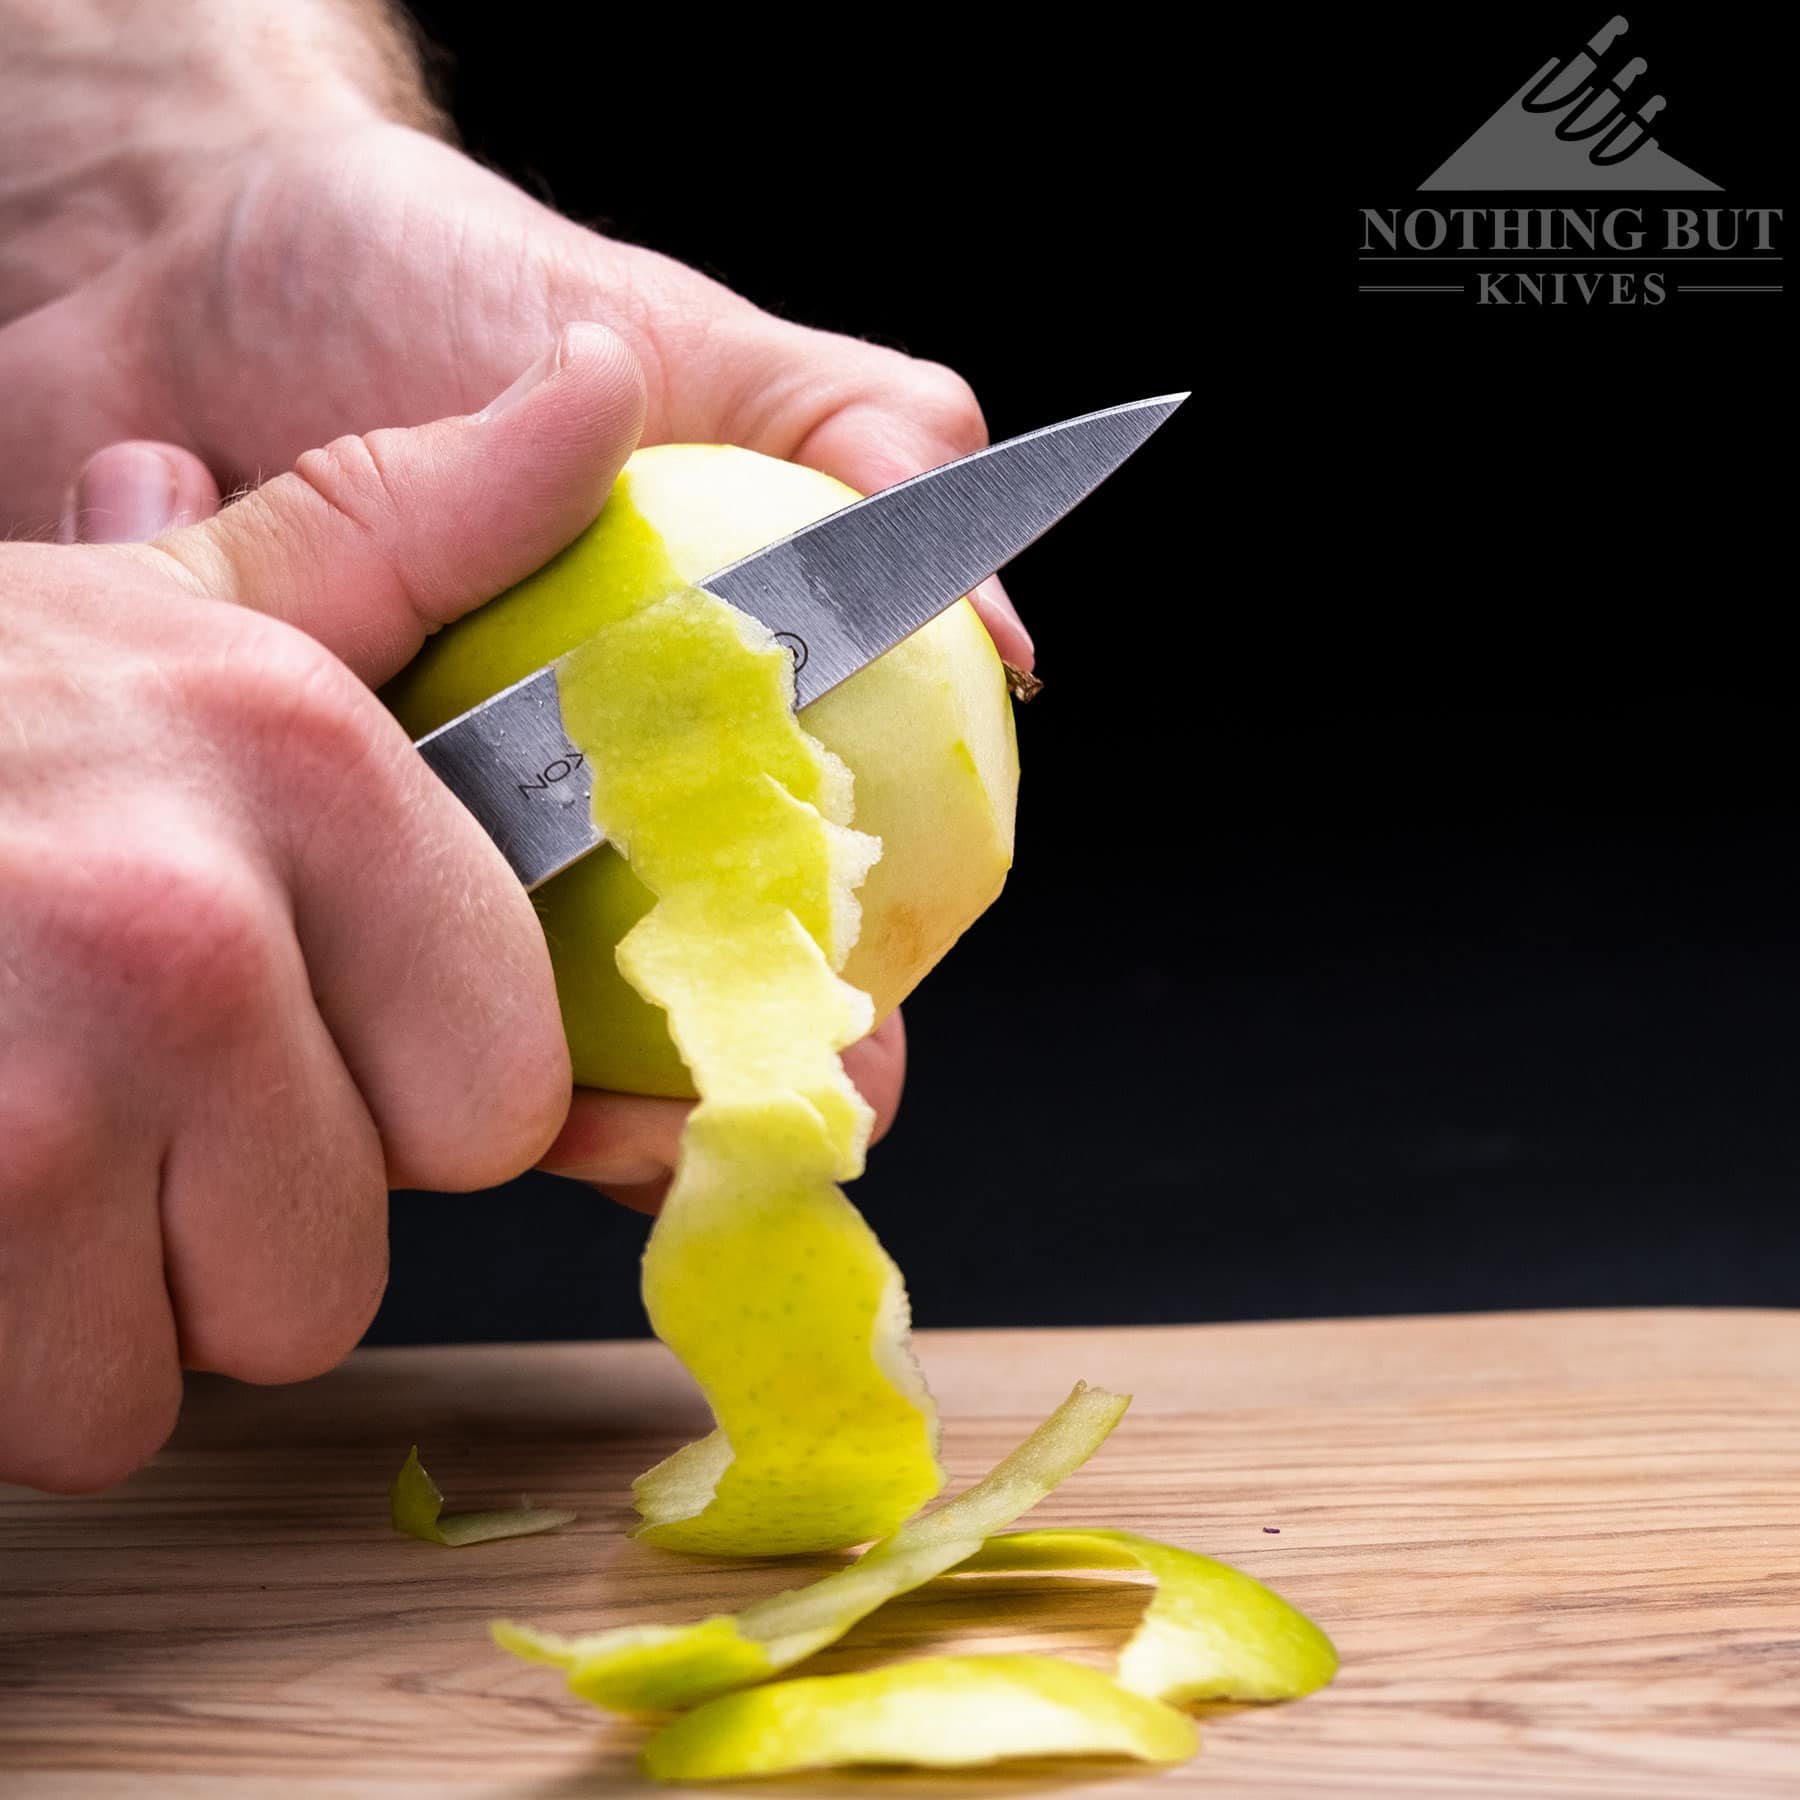 A green apple being peeled with the Wusthof Classic Ikon paring knife.